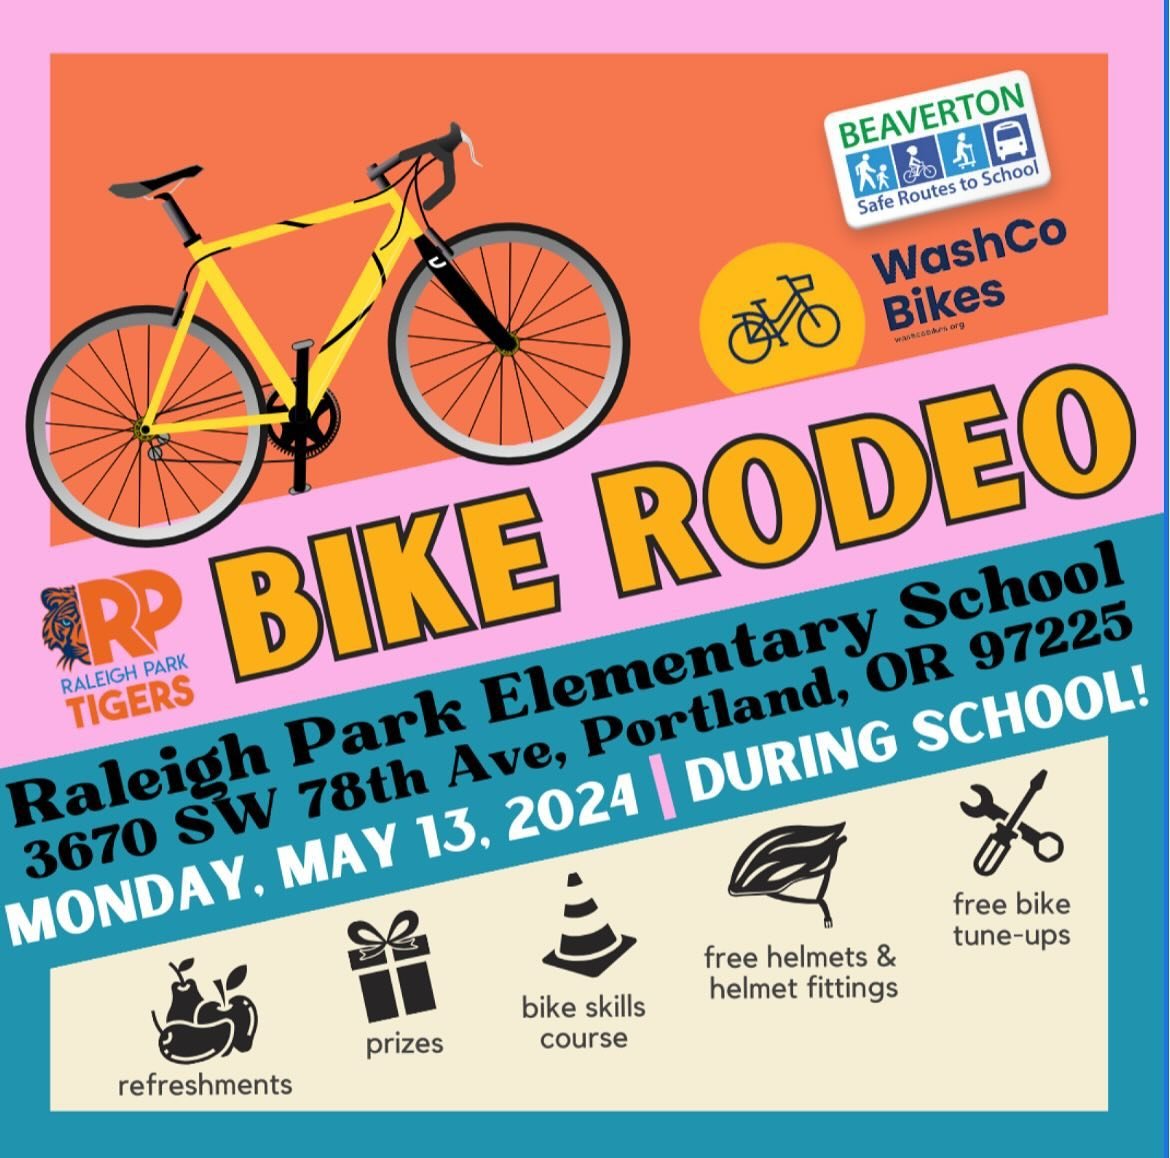 This coming Monday, May 13th is our 1st bike rodeo!!! 

Ride your bike and/or bring your helmet for a tune-up and helmet fitting.

Gear up for a wild ride at the Raleigh Park Elementary Bike Rodeo! Students, bring your bikes and helmets (bikes and he